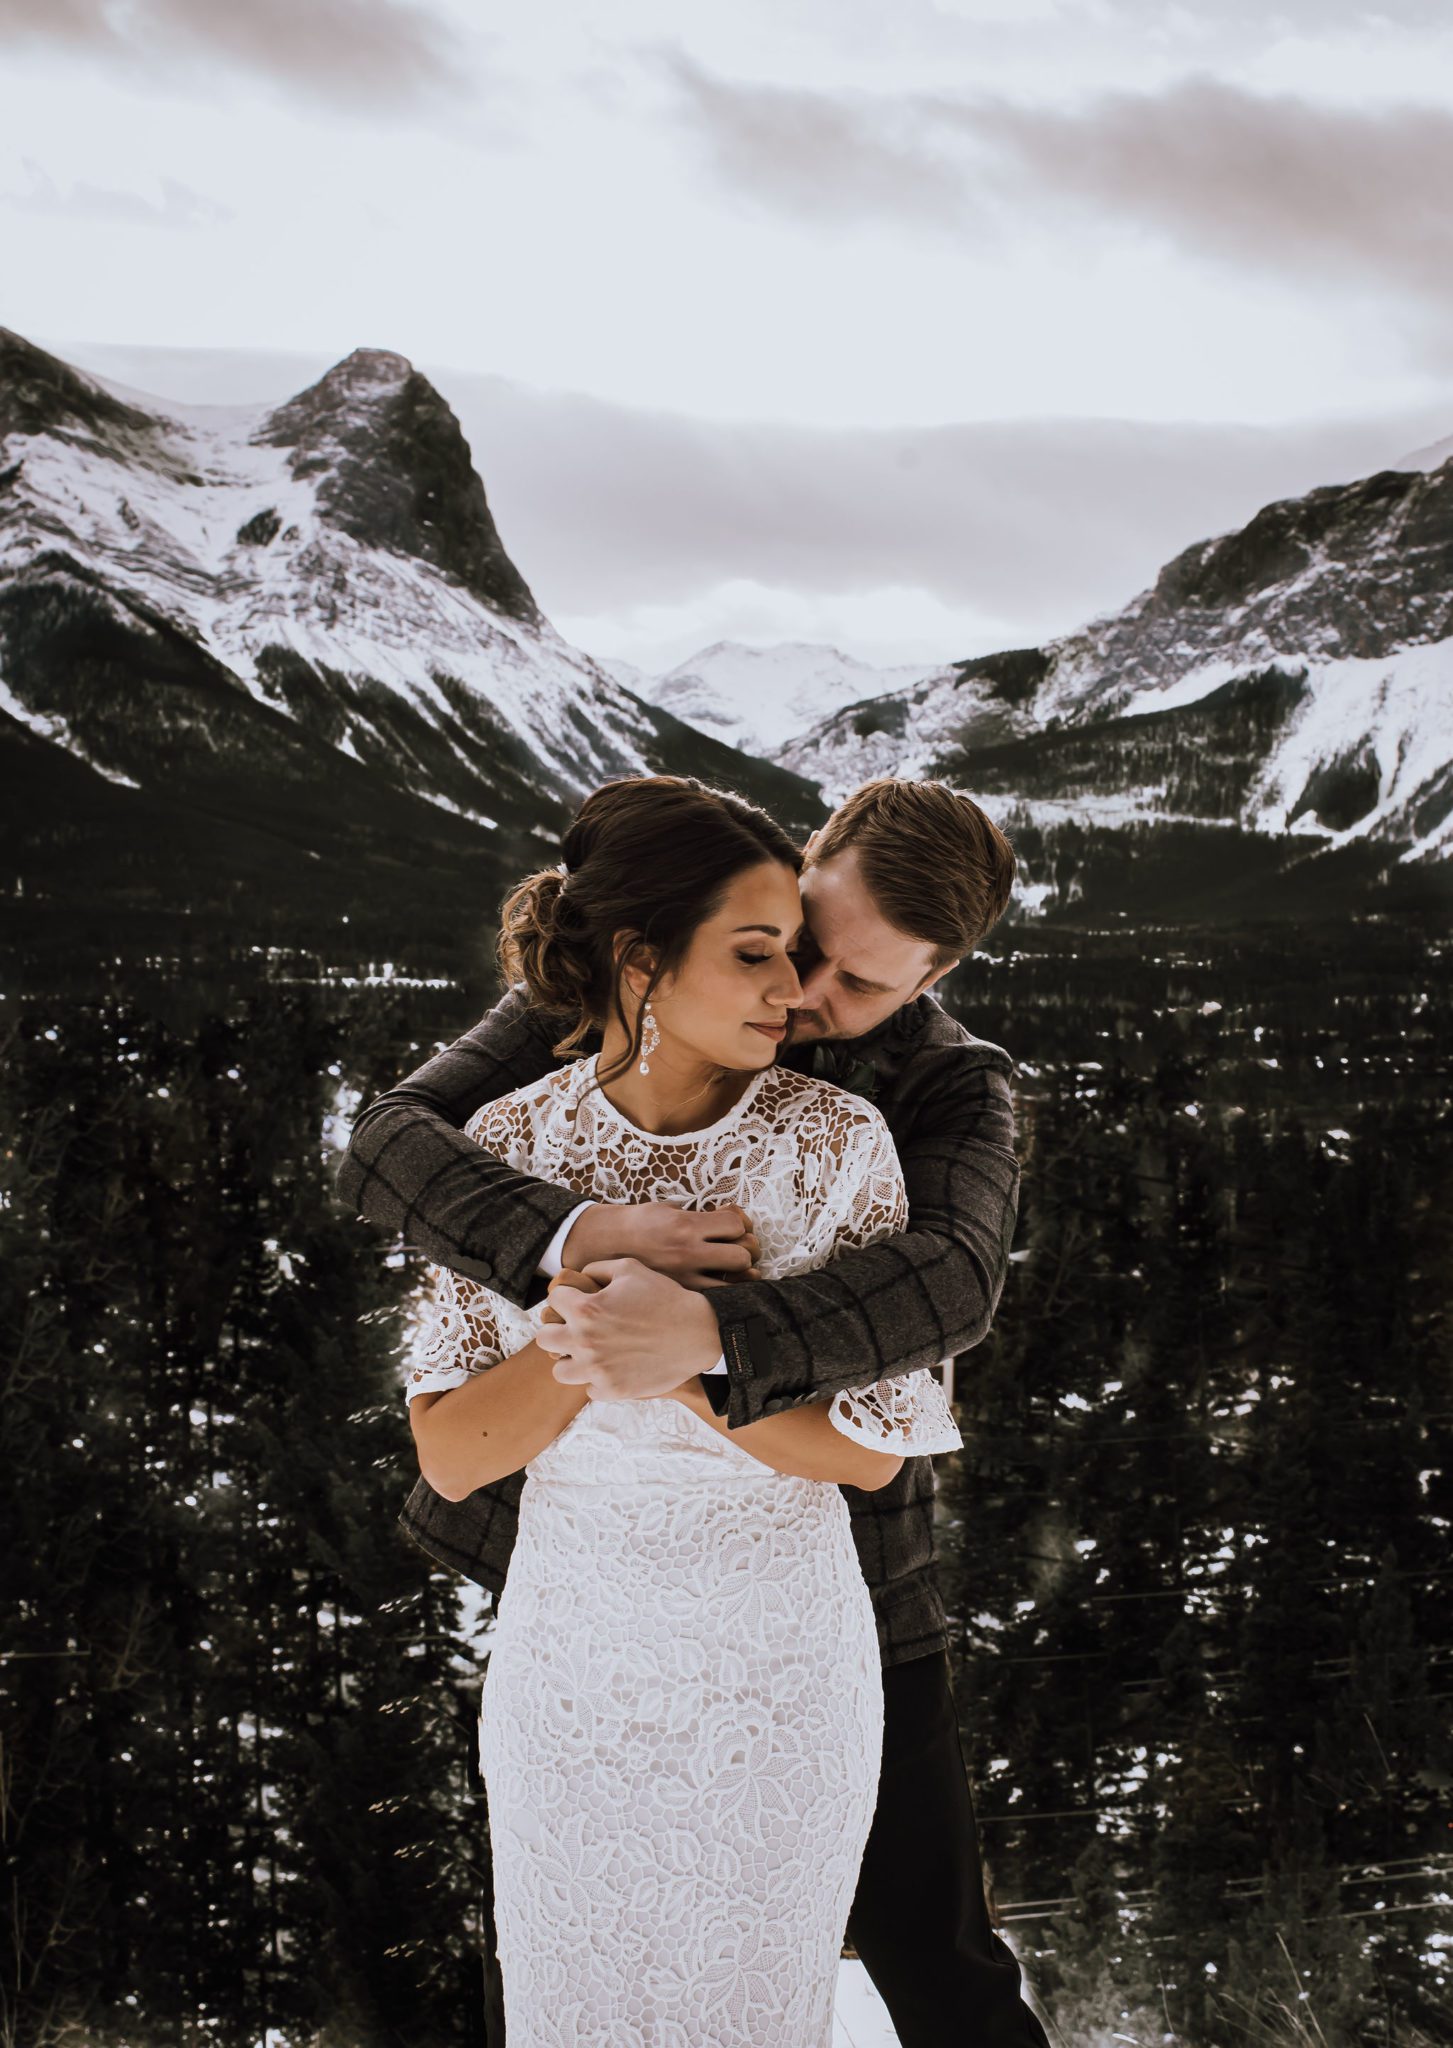 Canmore winter wedding inspiration with the Rocky Mountains in the background